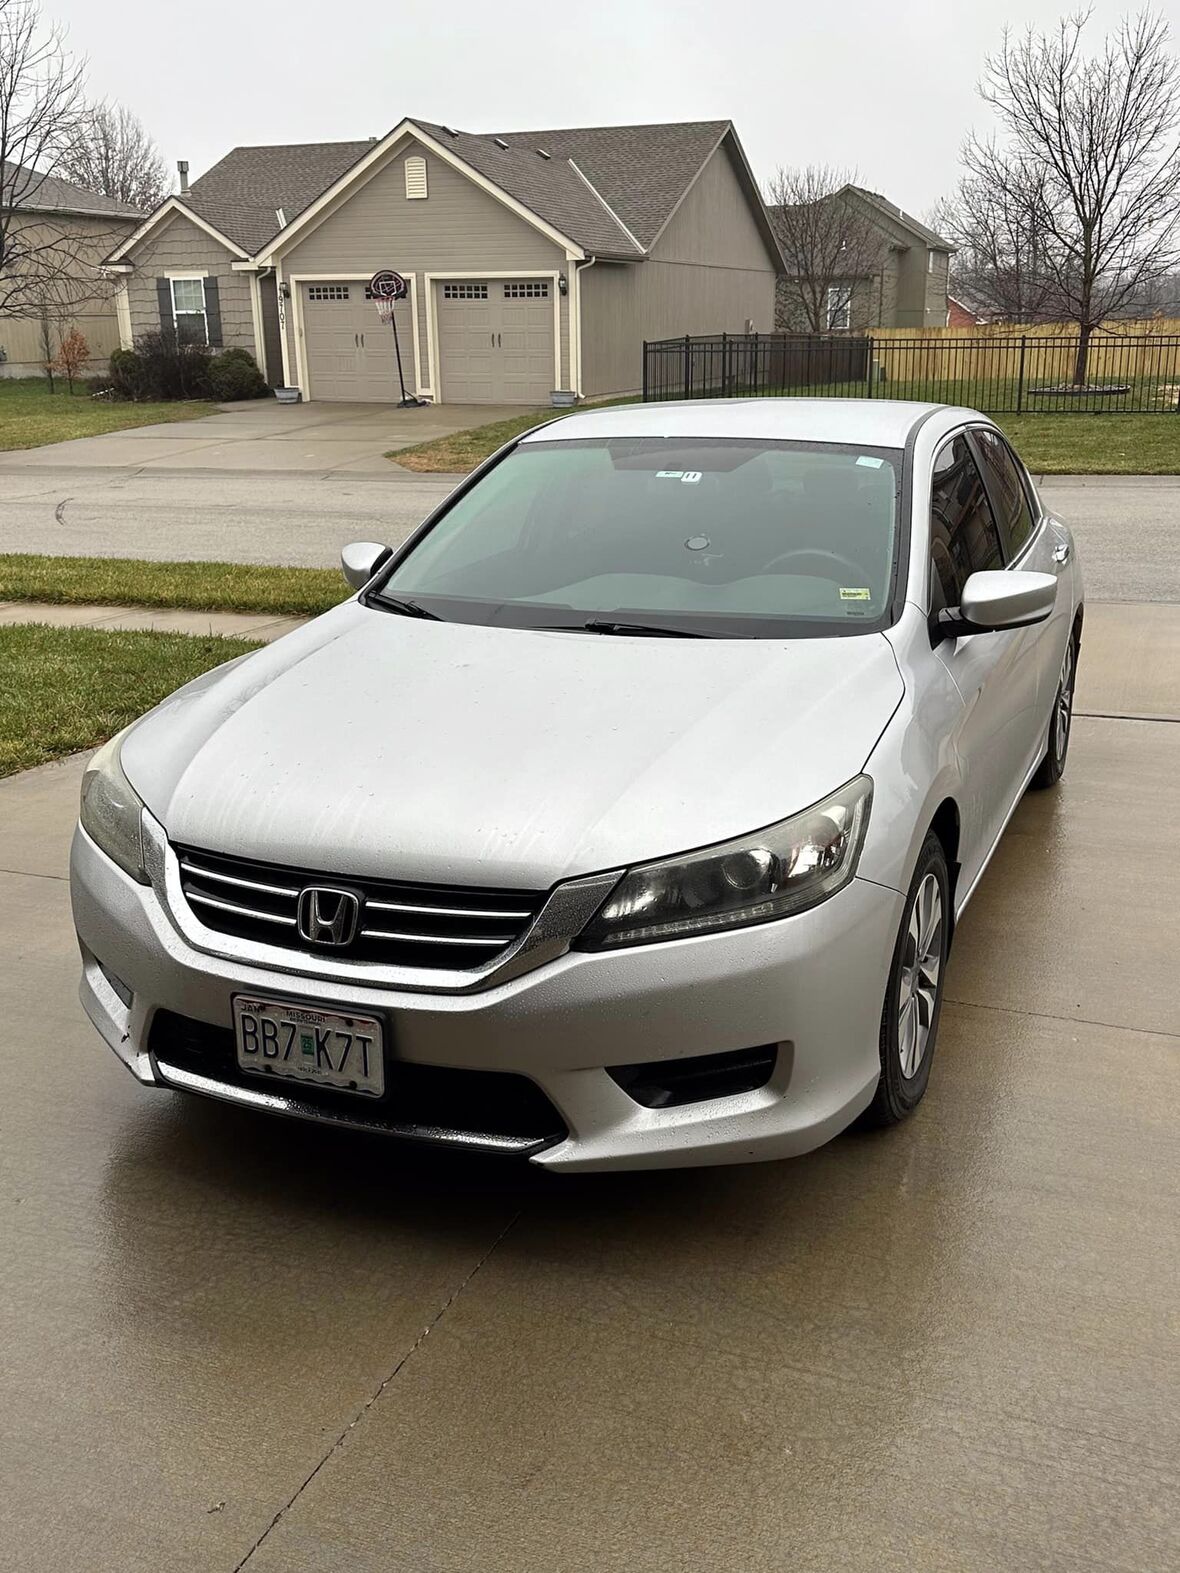 2013 accord front left